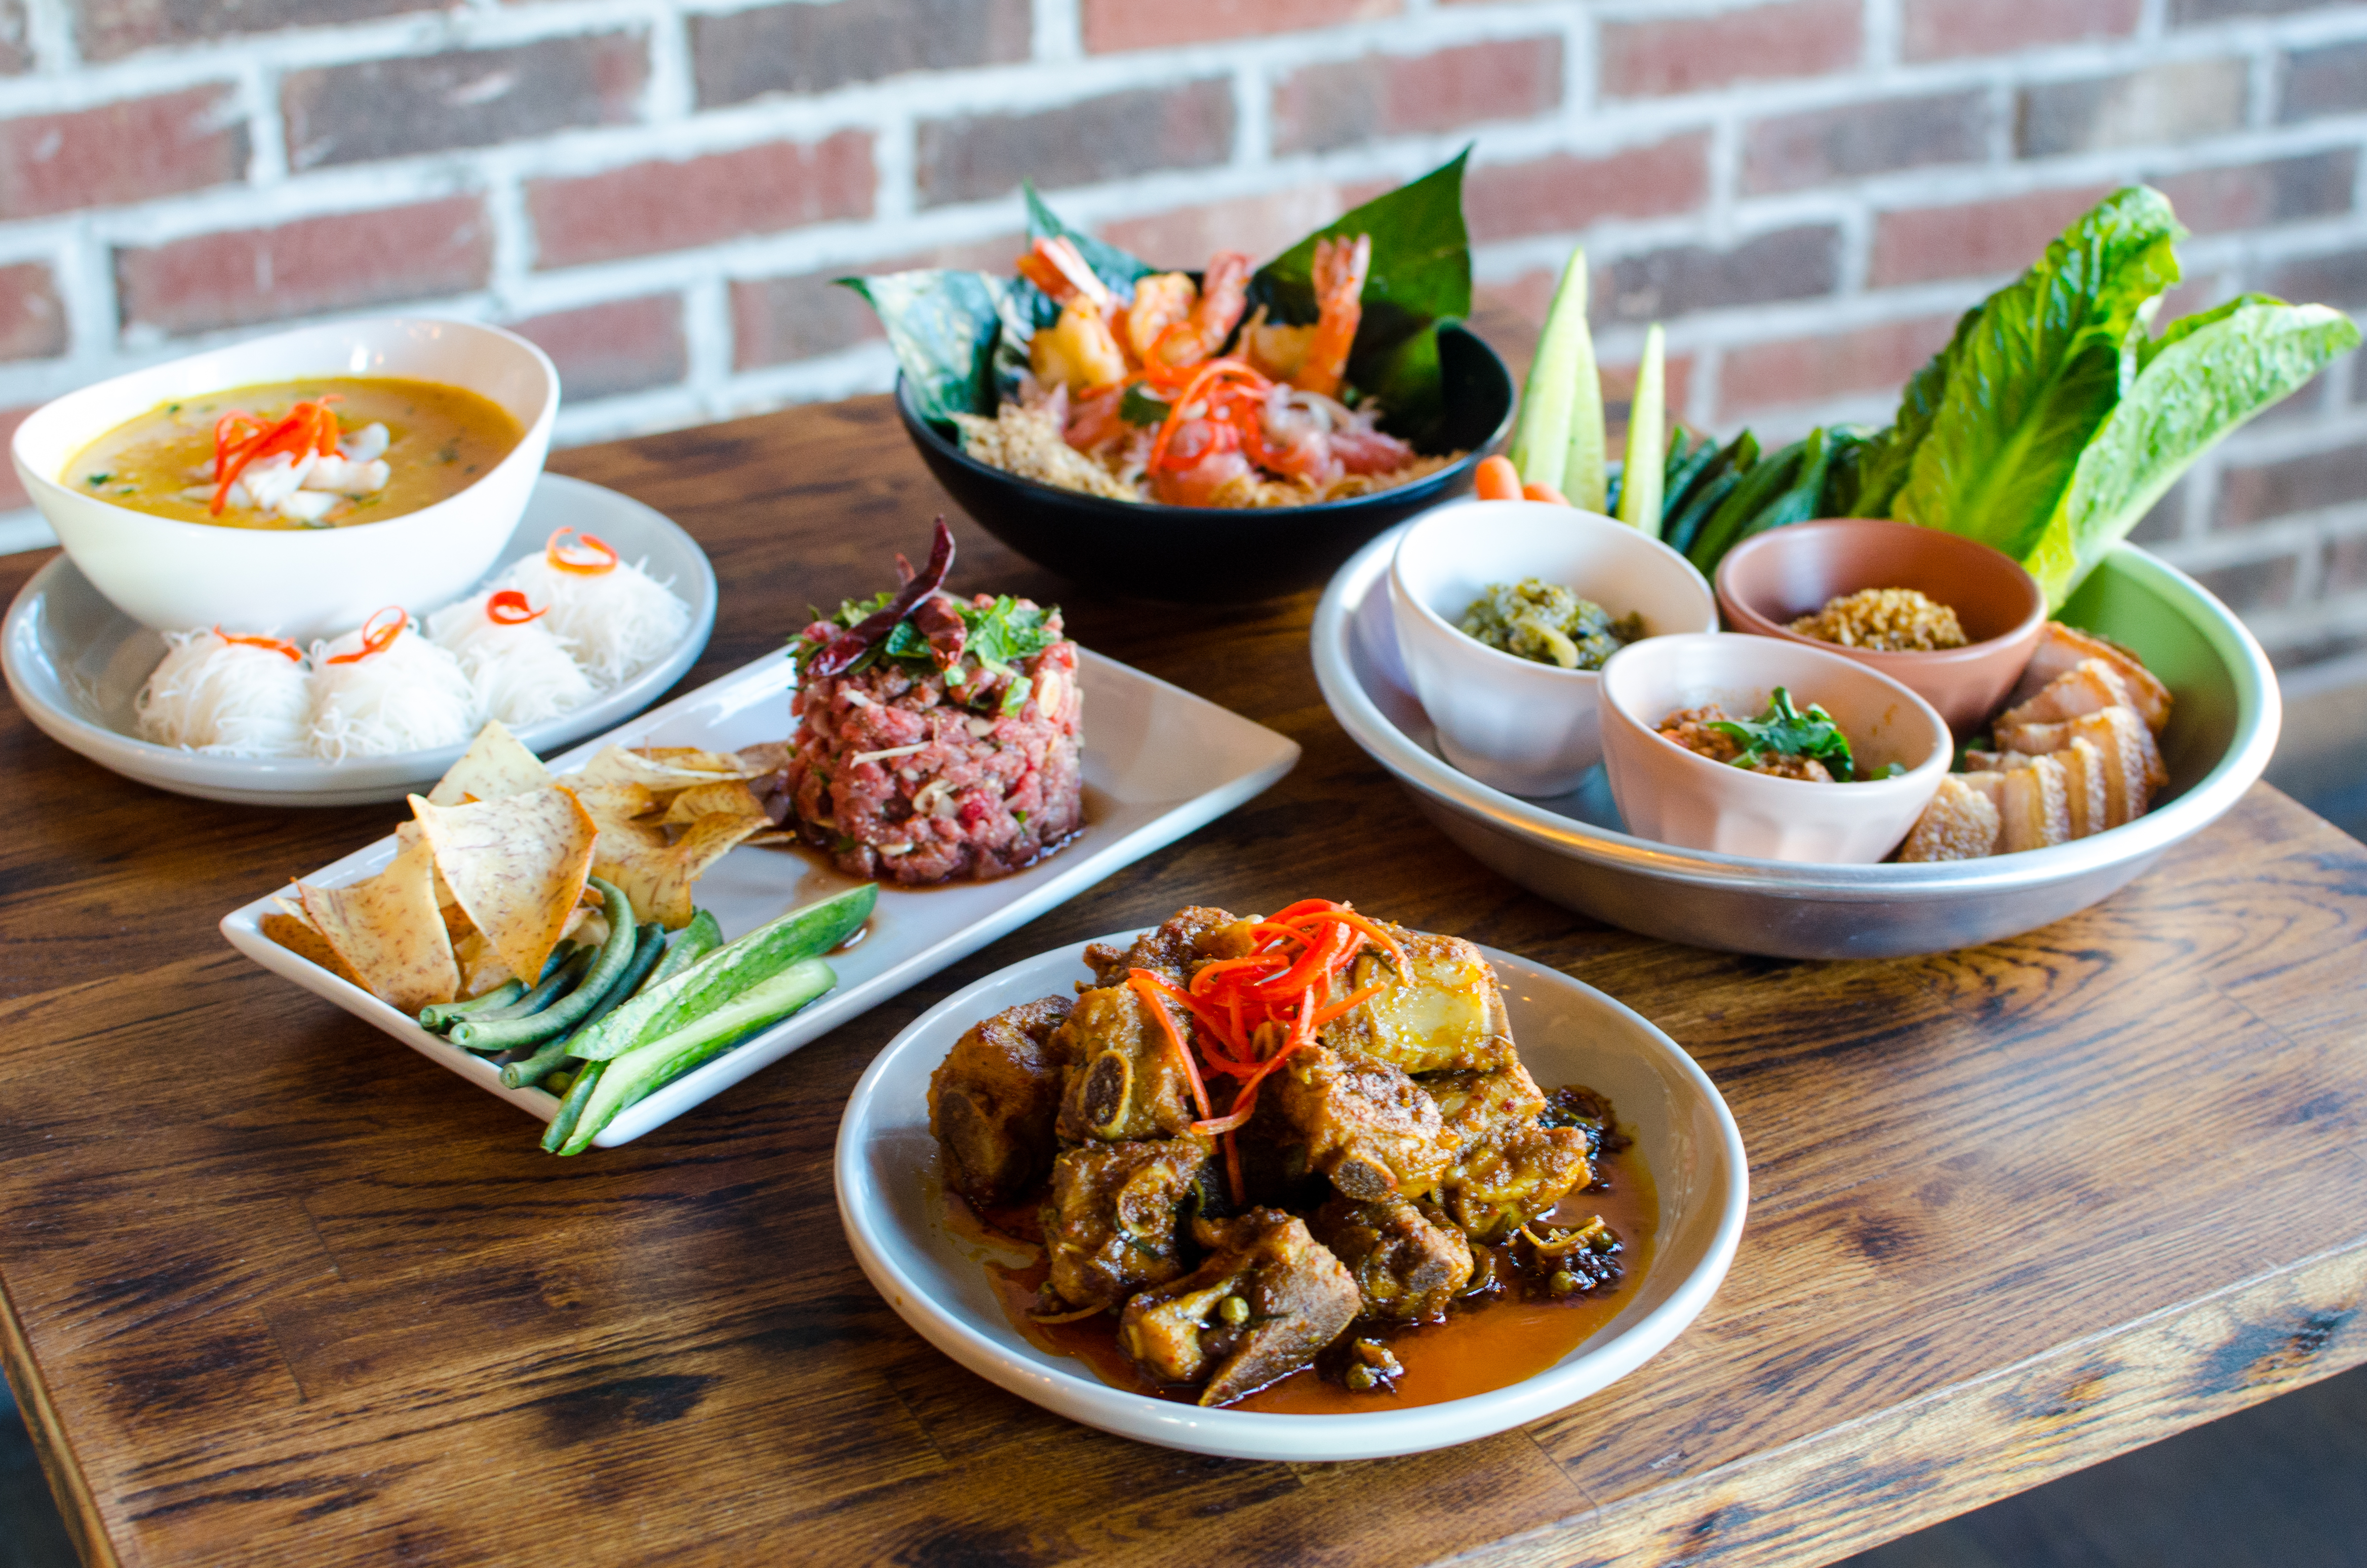 Five Thai dishes sit on a wooden table in front of a brick wall. There’s a curry, a pomelo salad with shrimp, a large pile of pork ribs, and more.